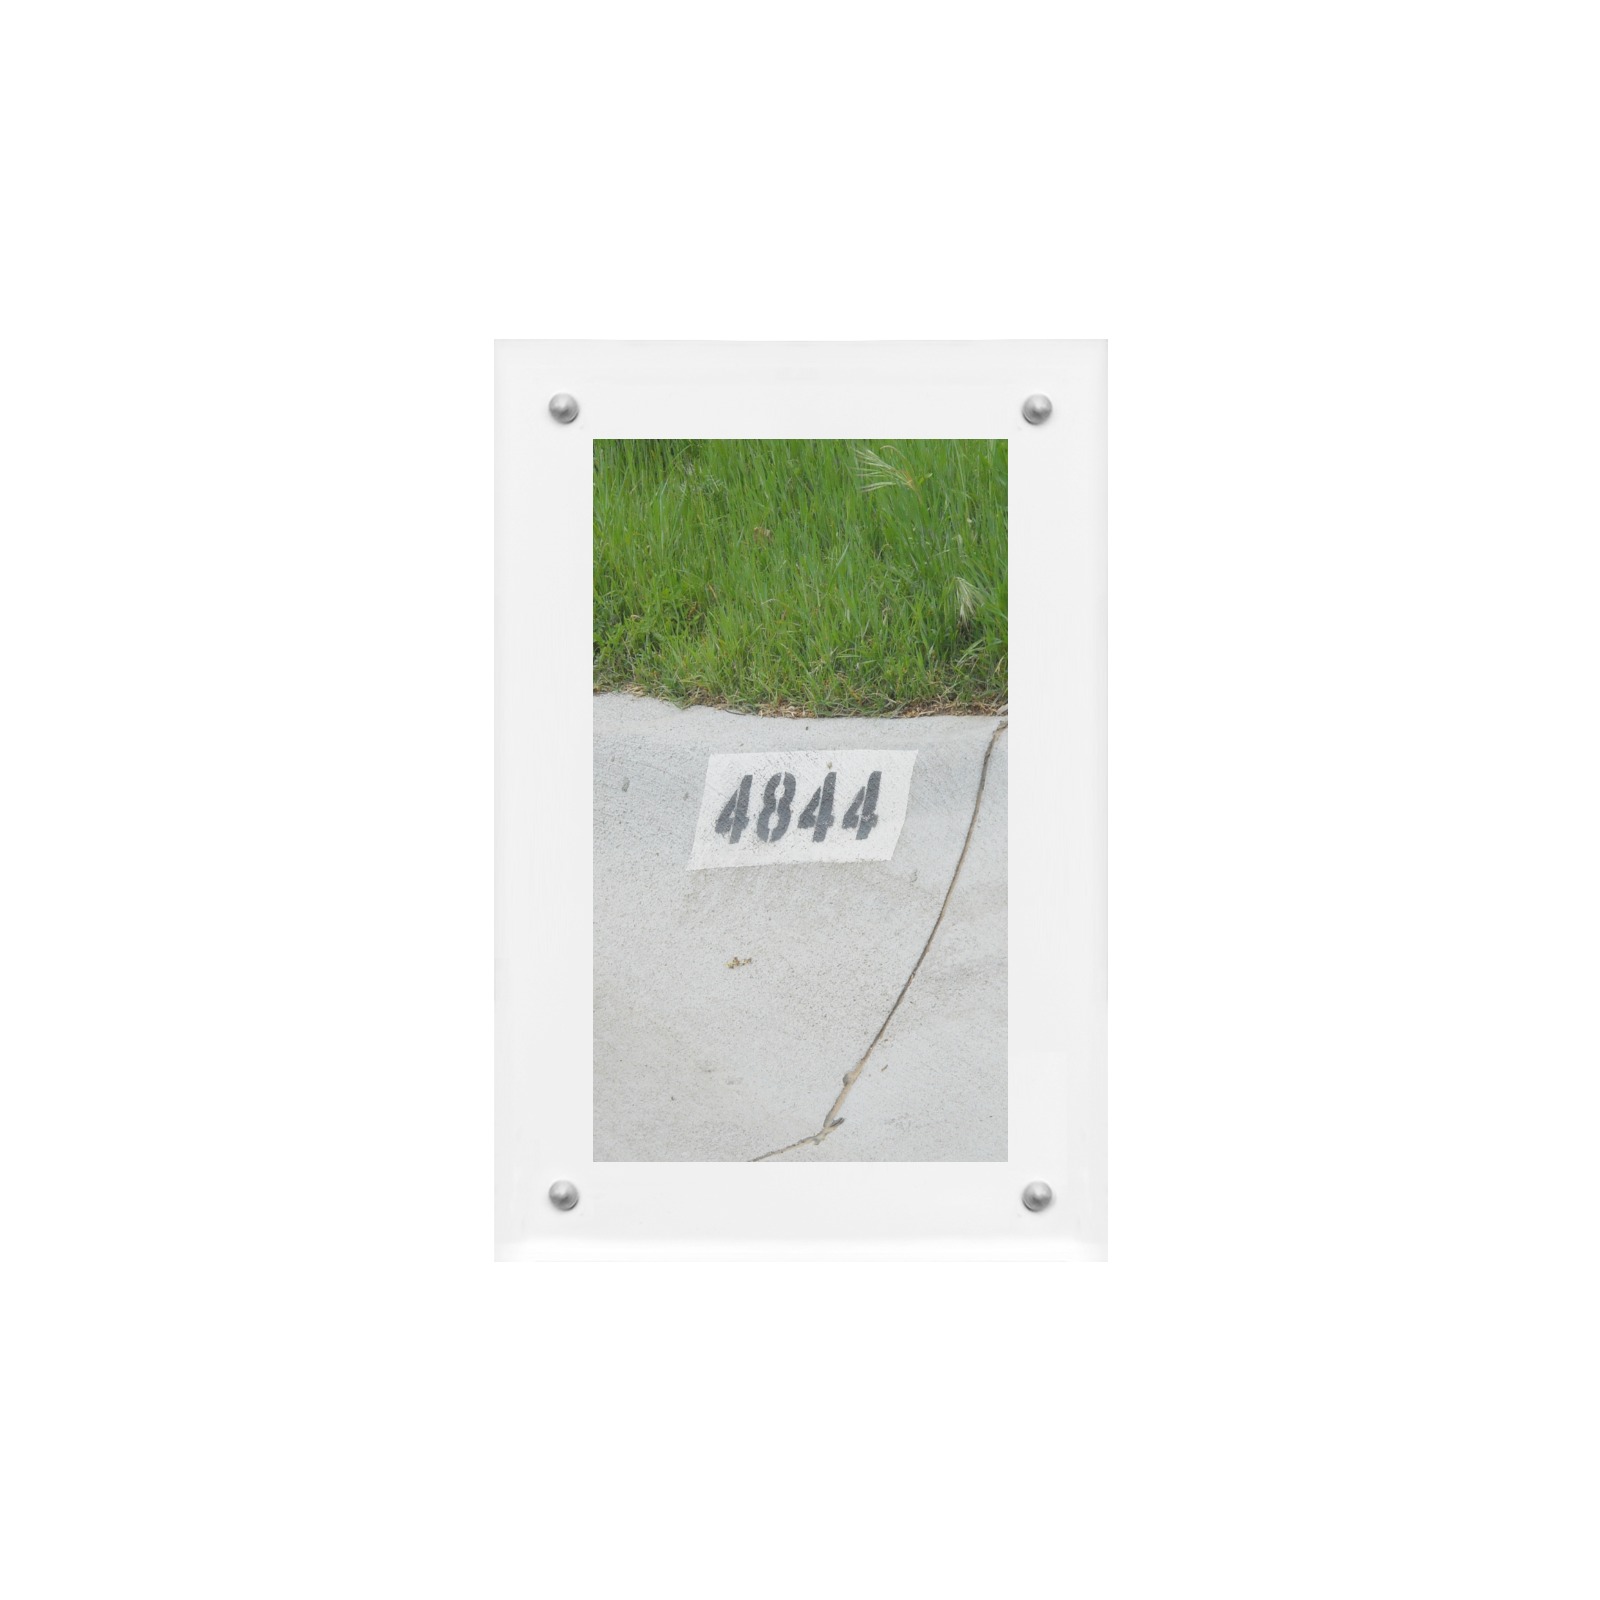 Street Number 4844 Acrylic Magnetic Photo Frame 4"x6"